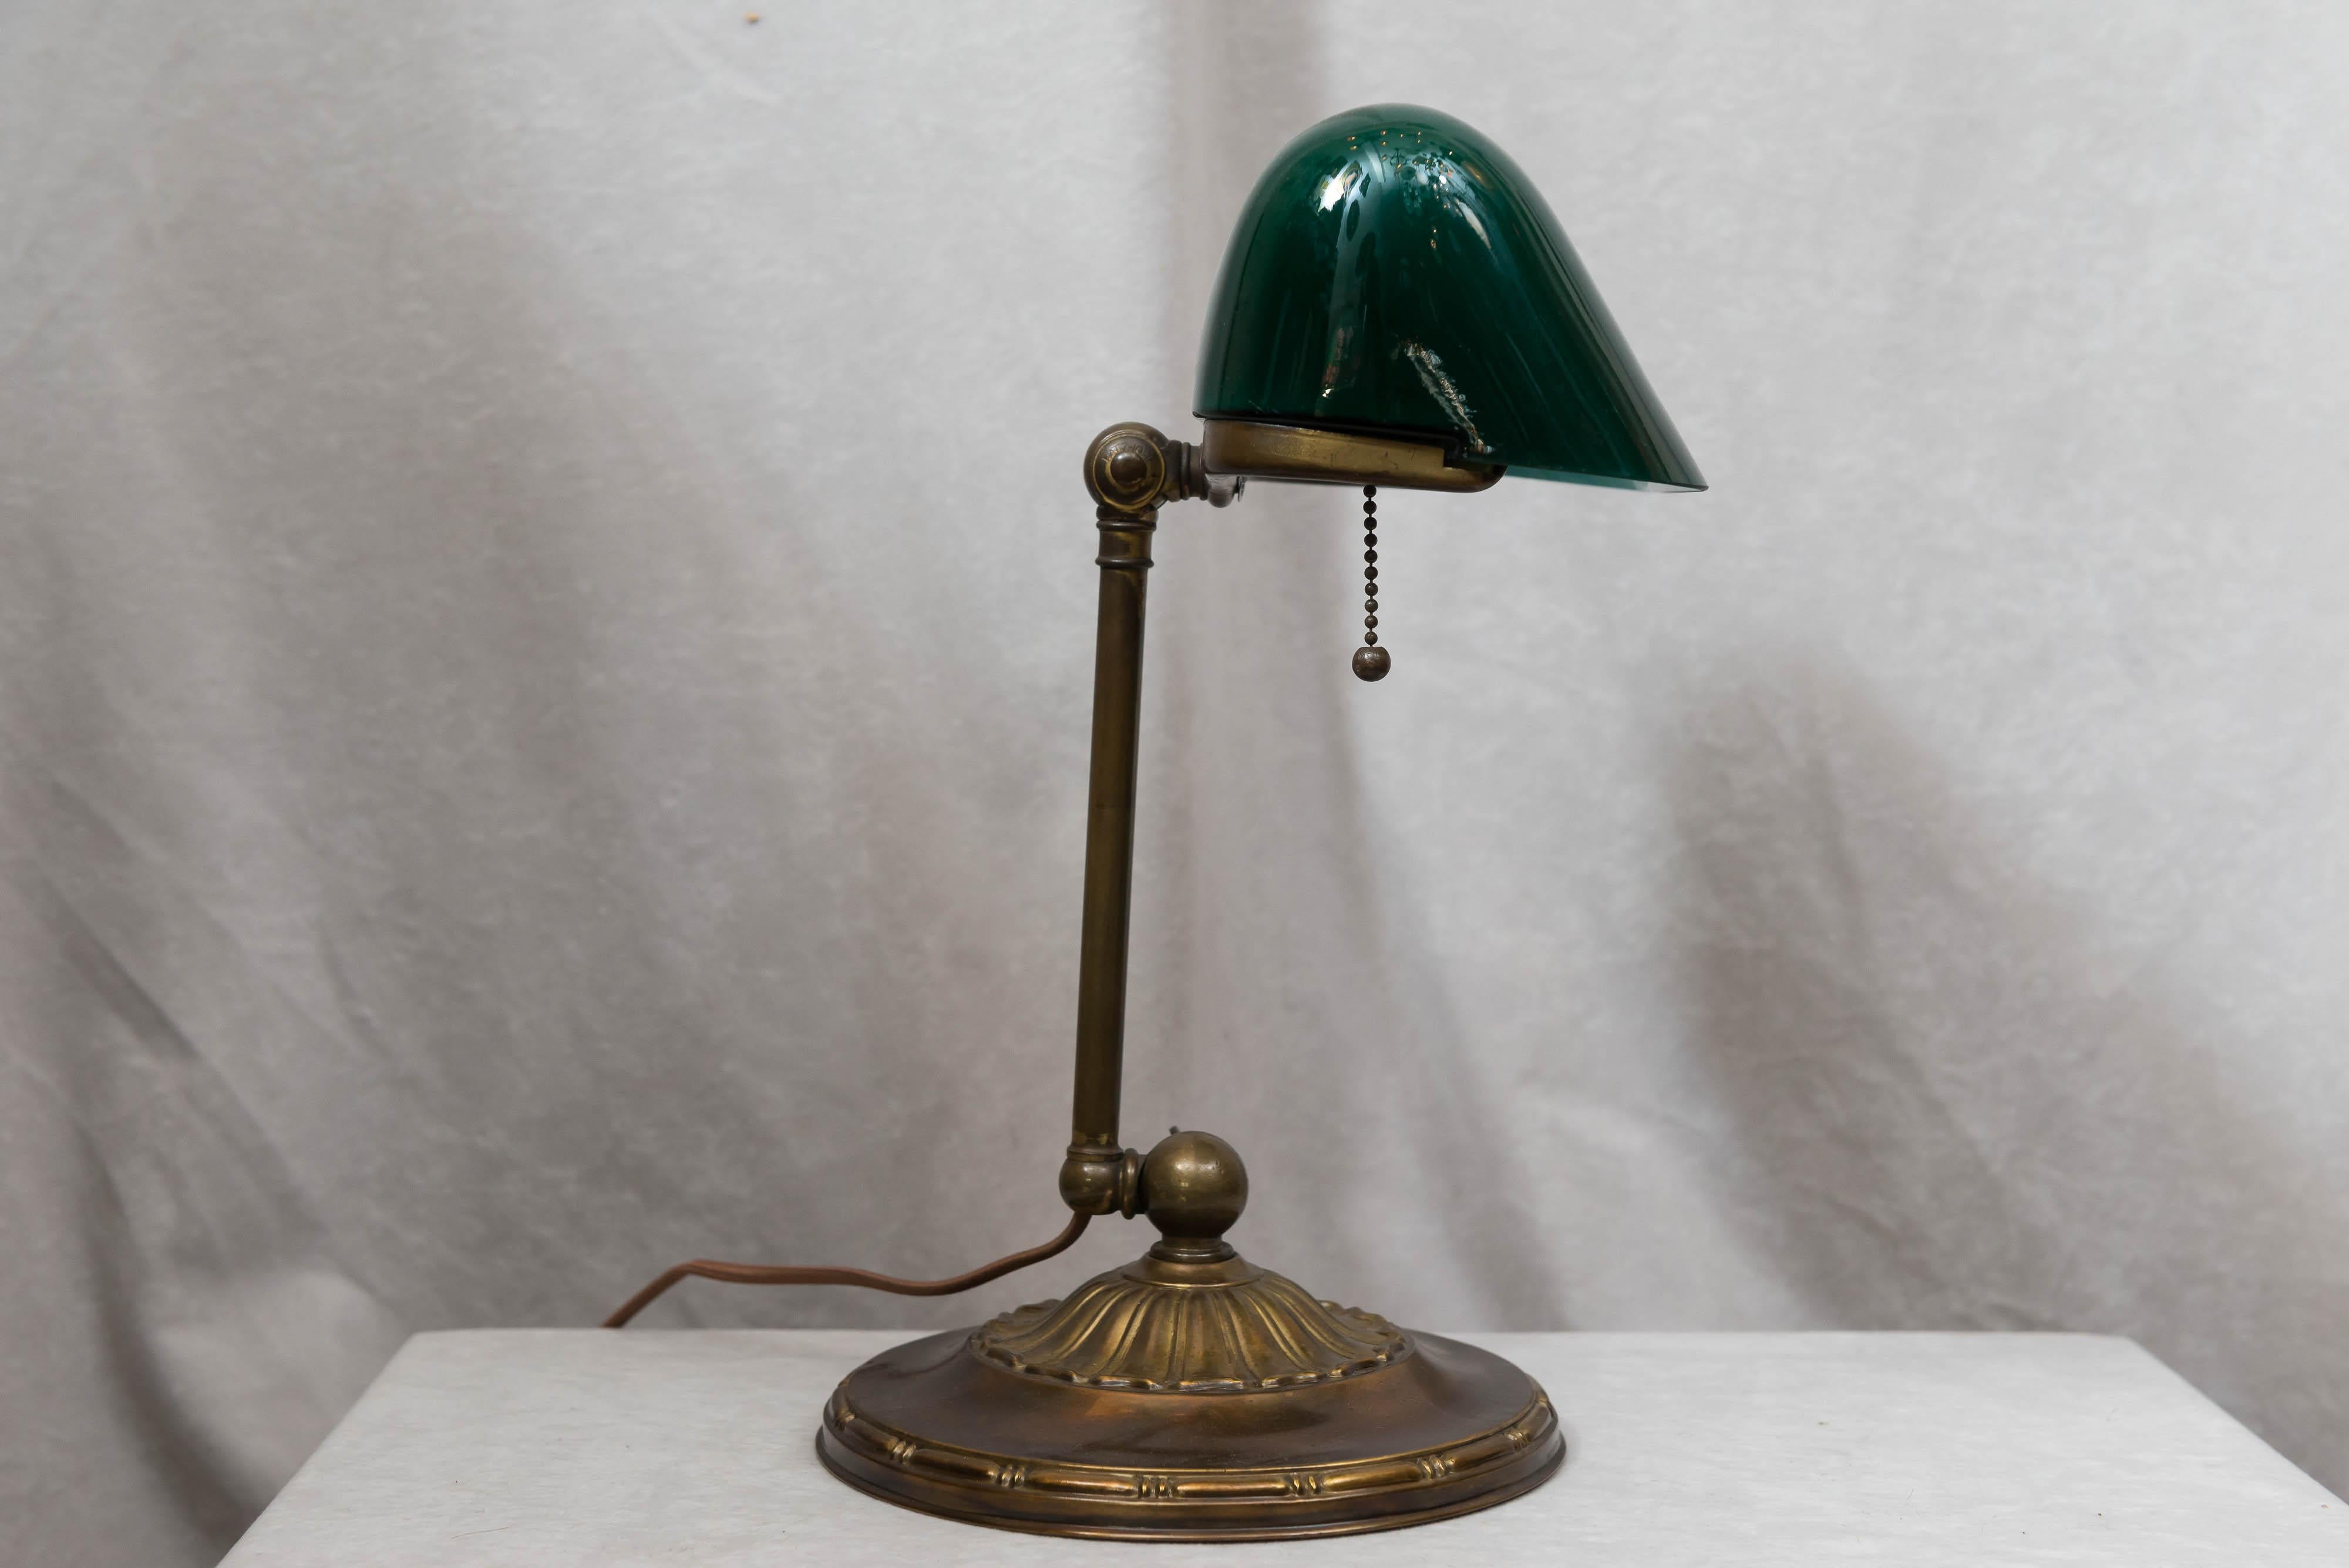 Hand-Crafted Green Shade Banker's Lamp, circa 1917 by the Emeralite Co.